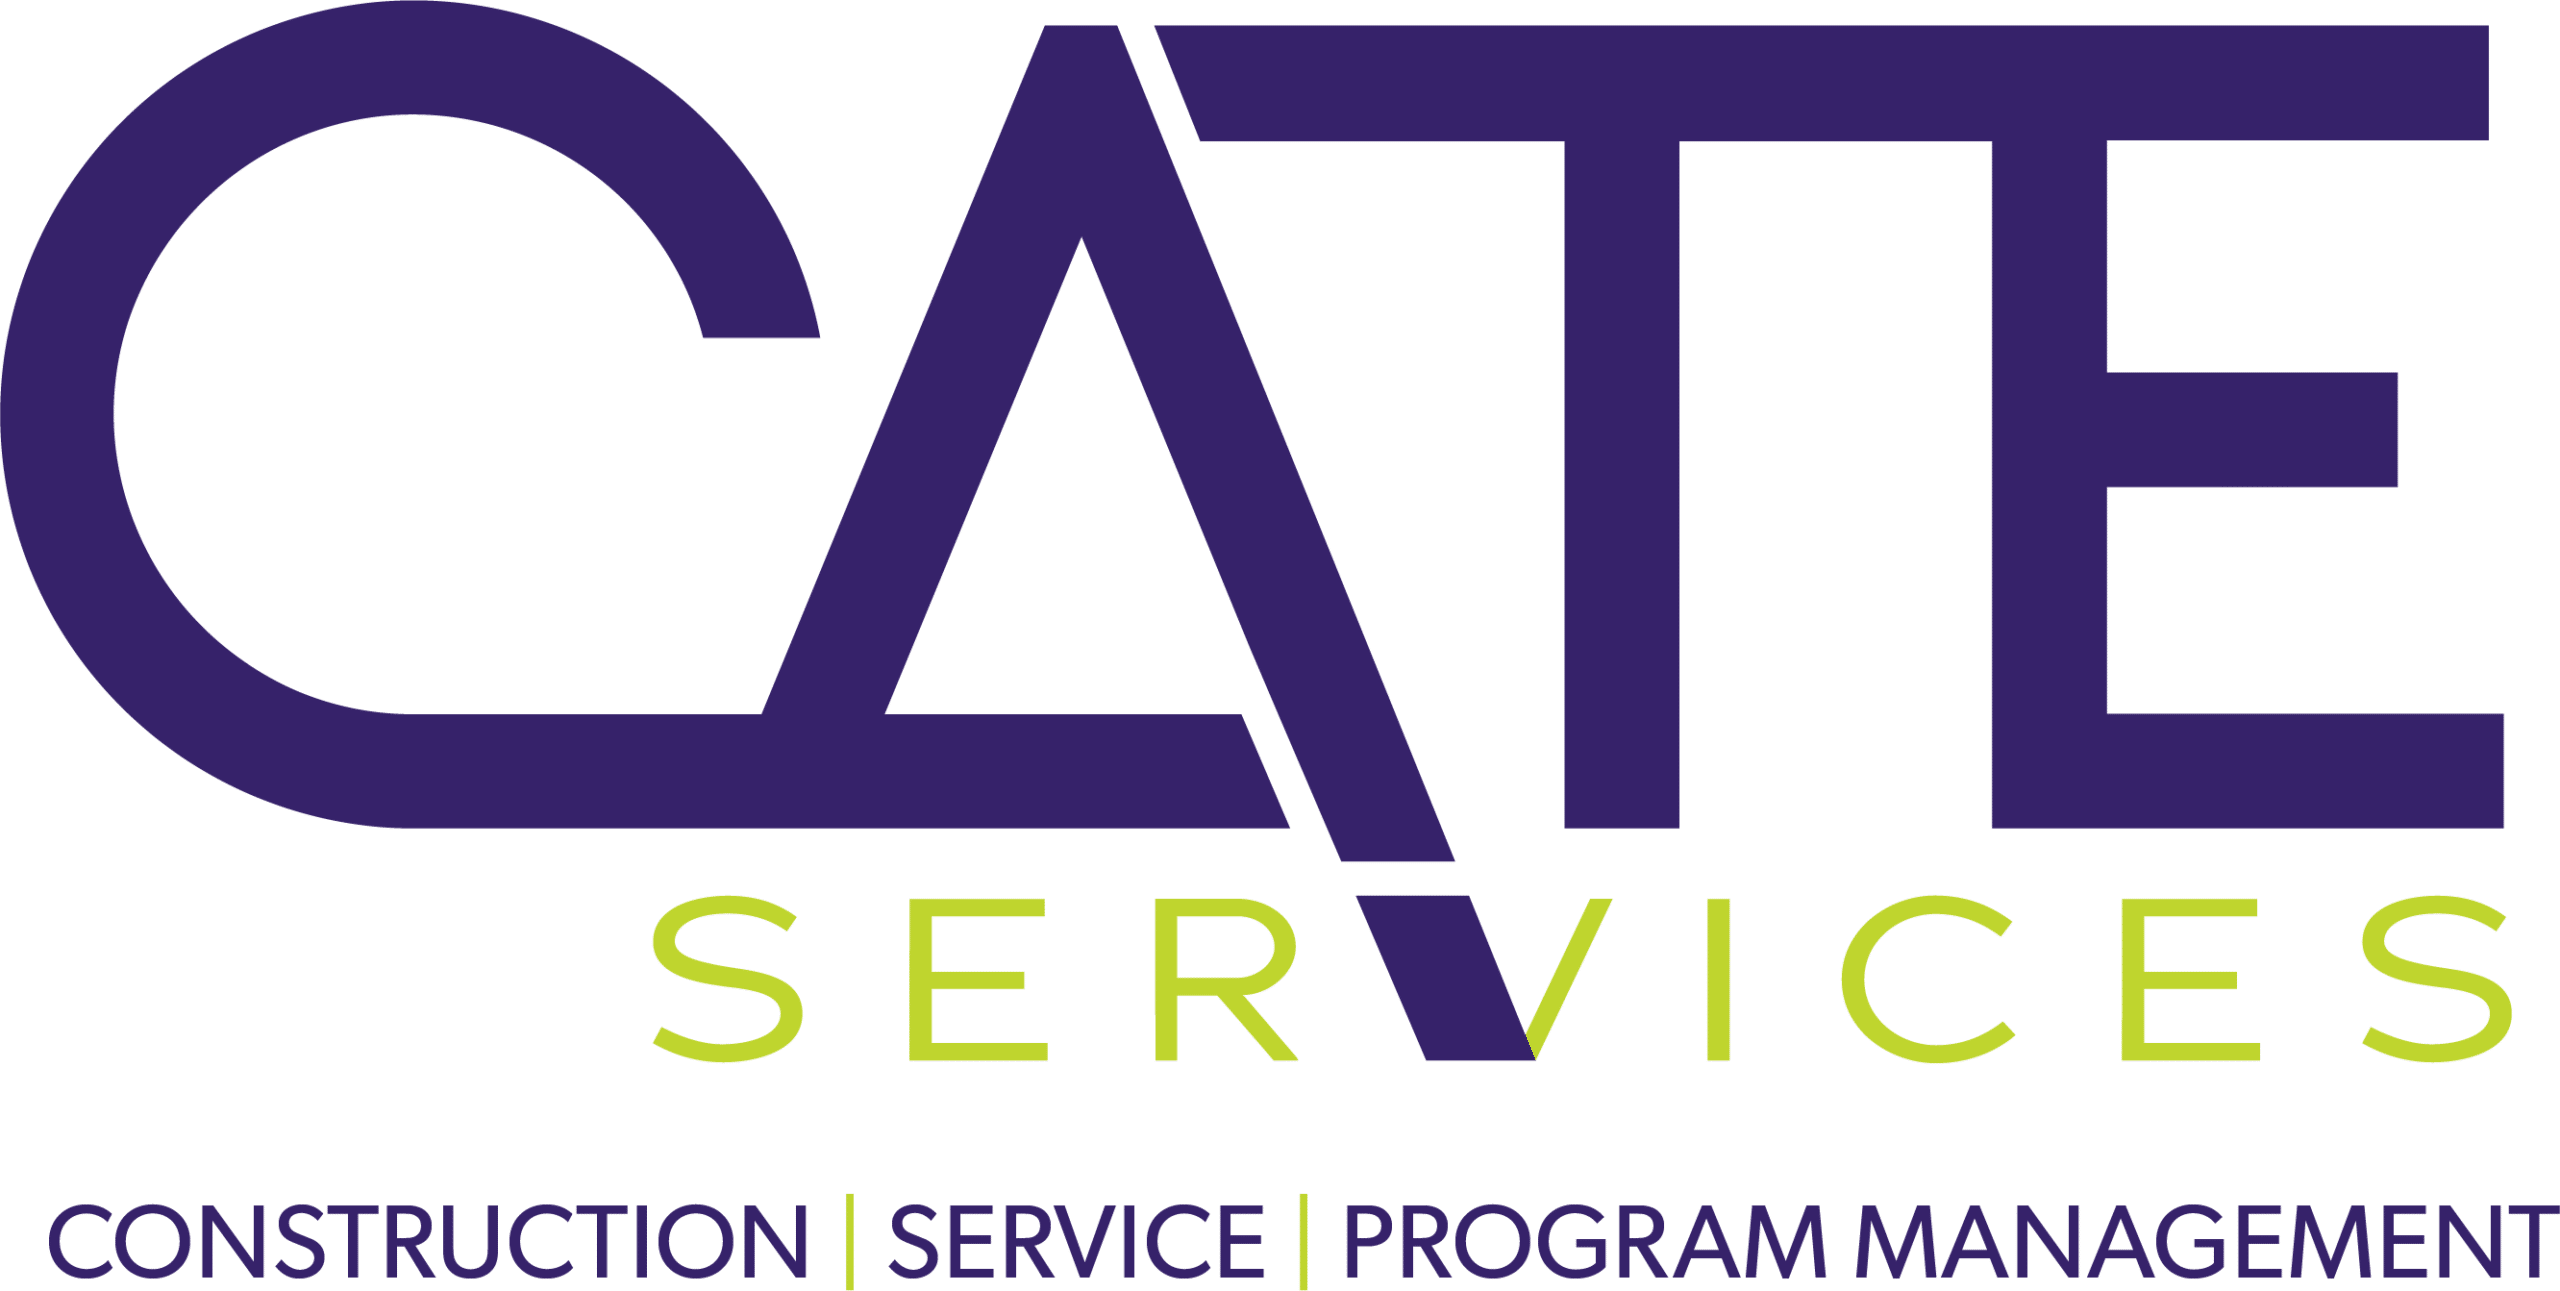 CATE Services